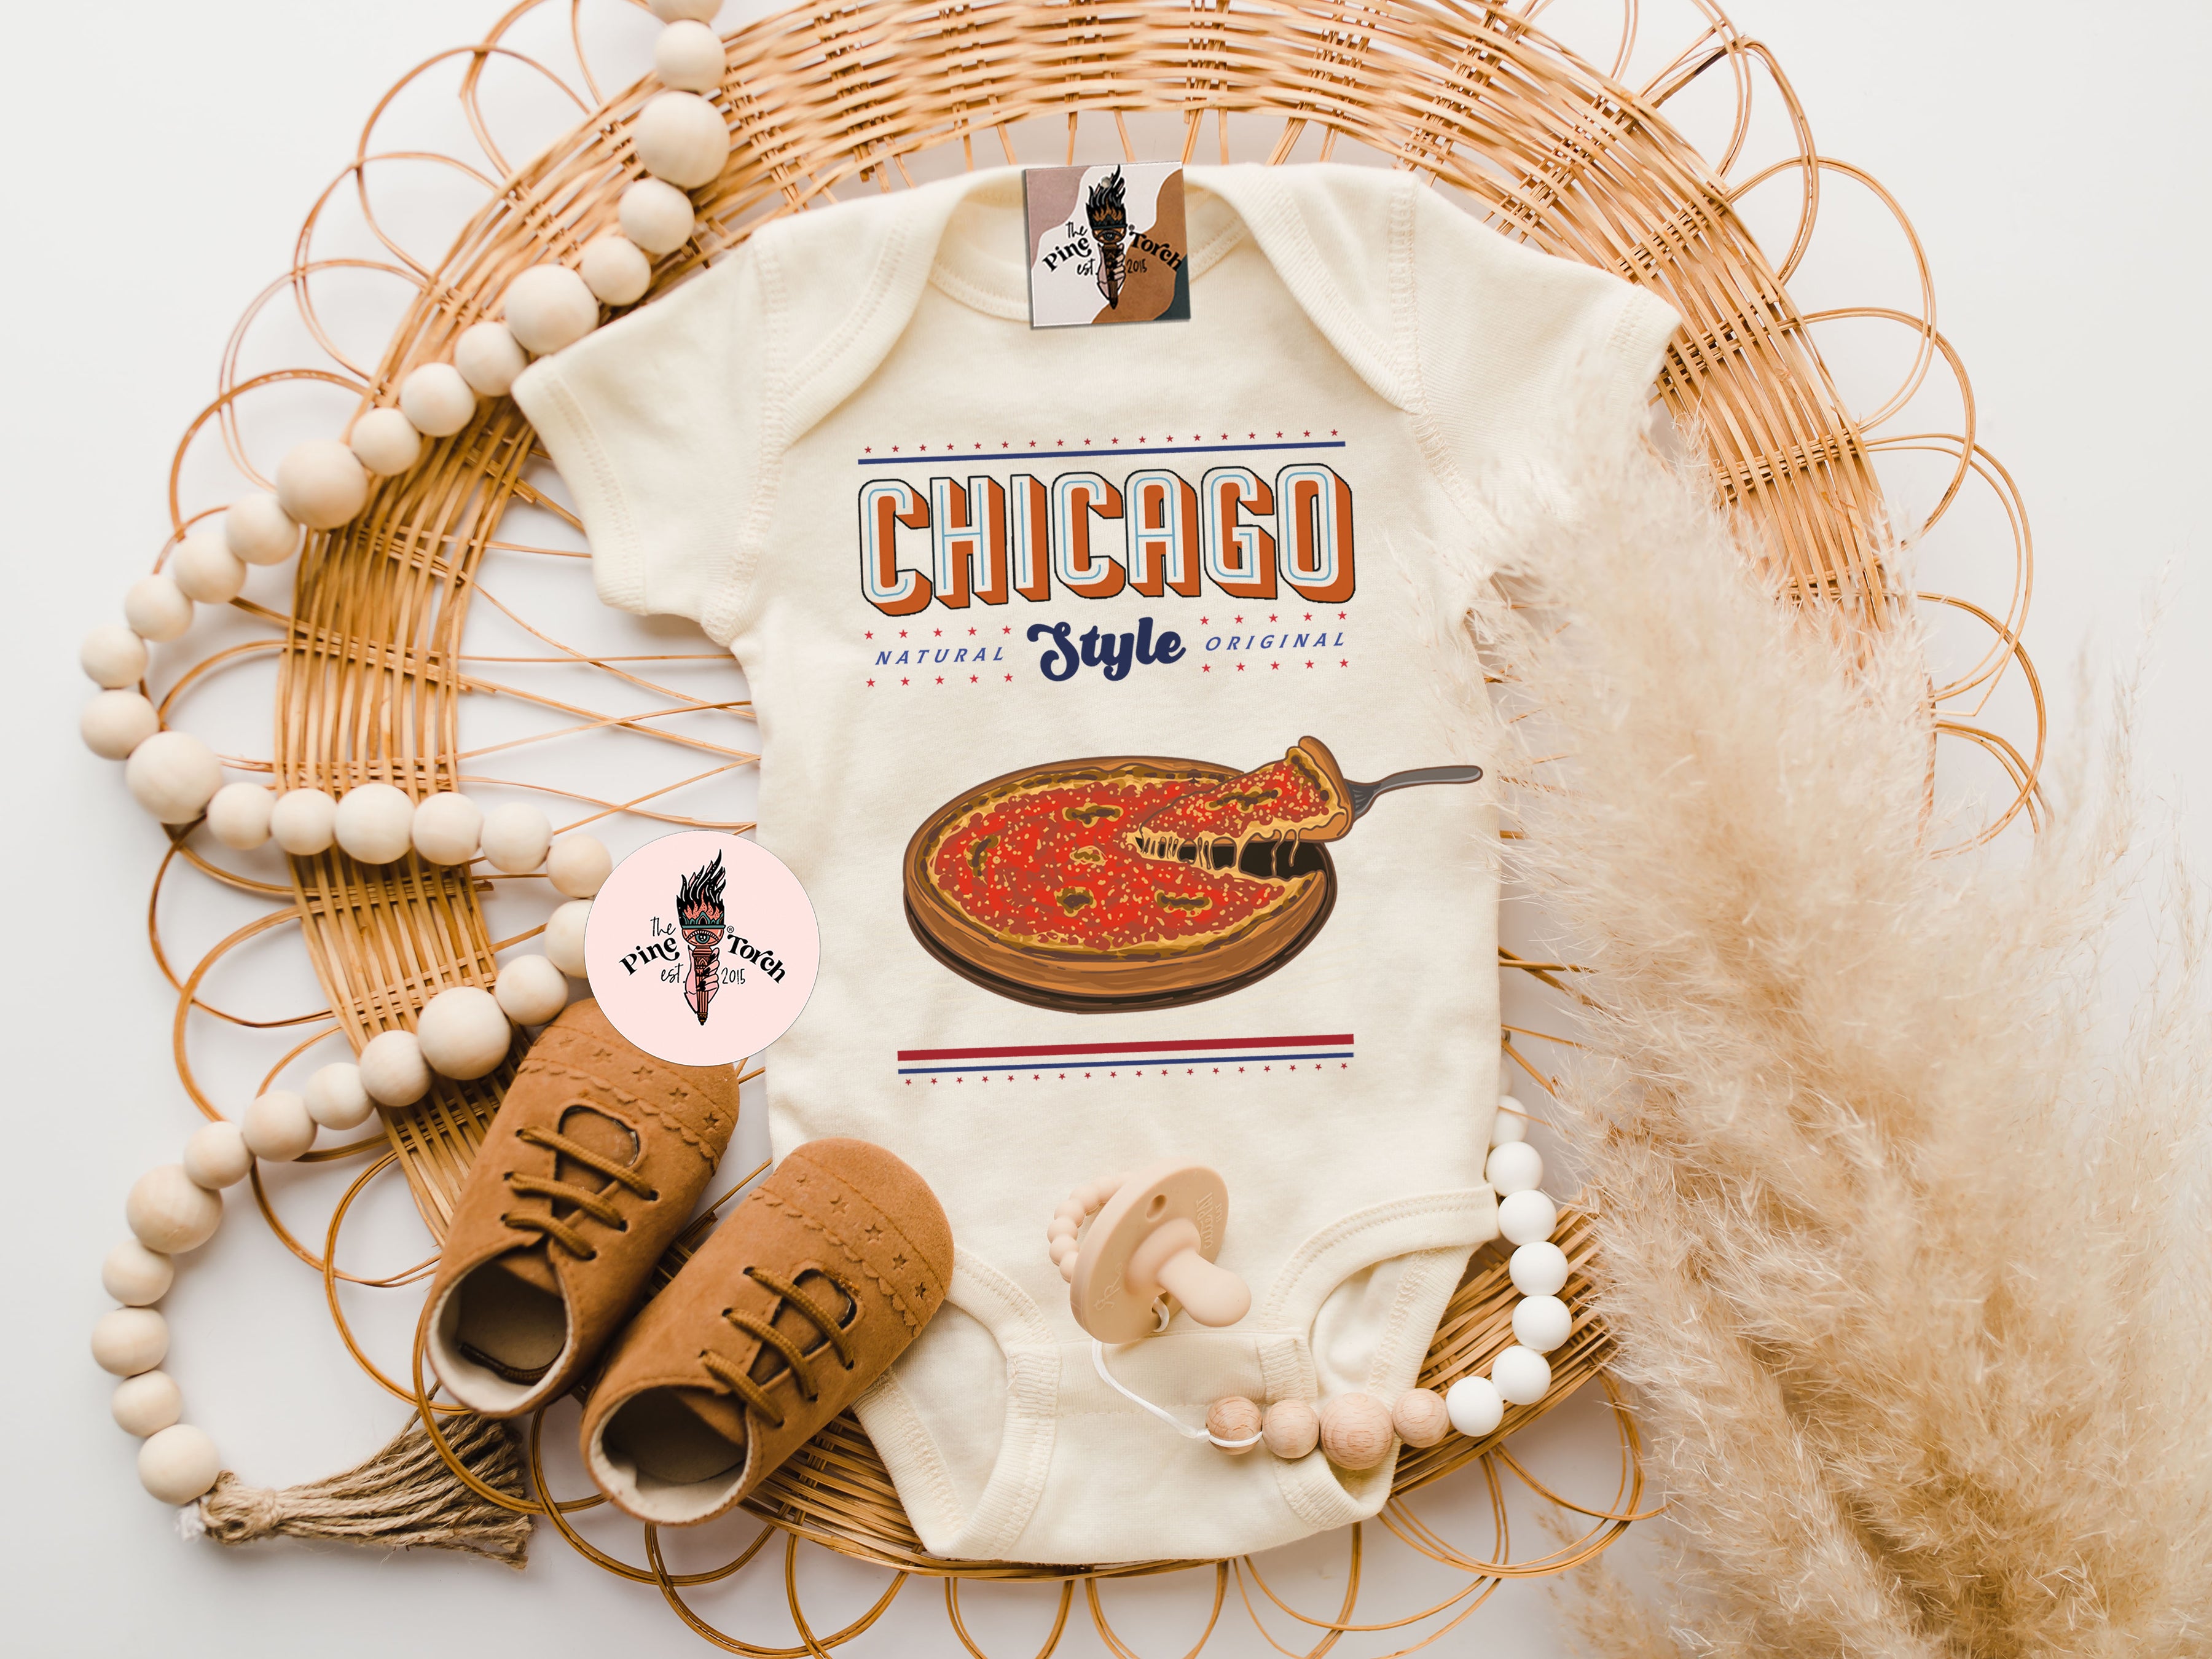 « CHICAGO STYLE PIZZA » KID'S TEE